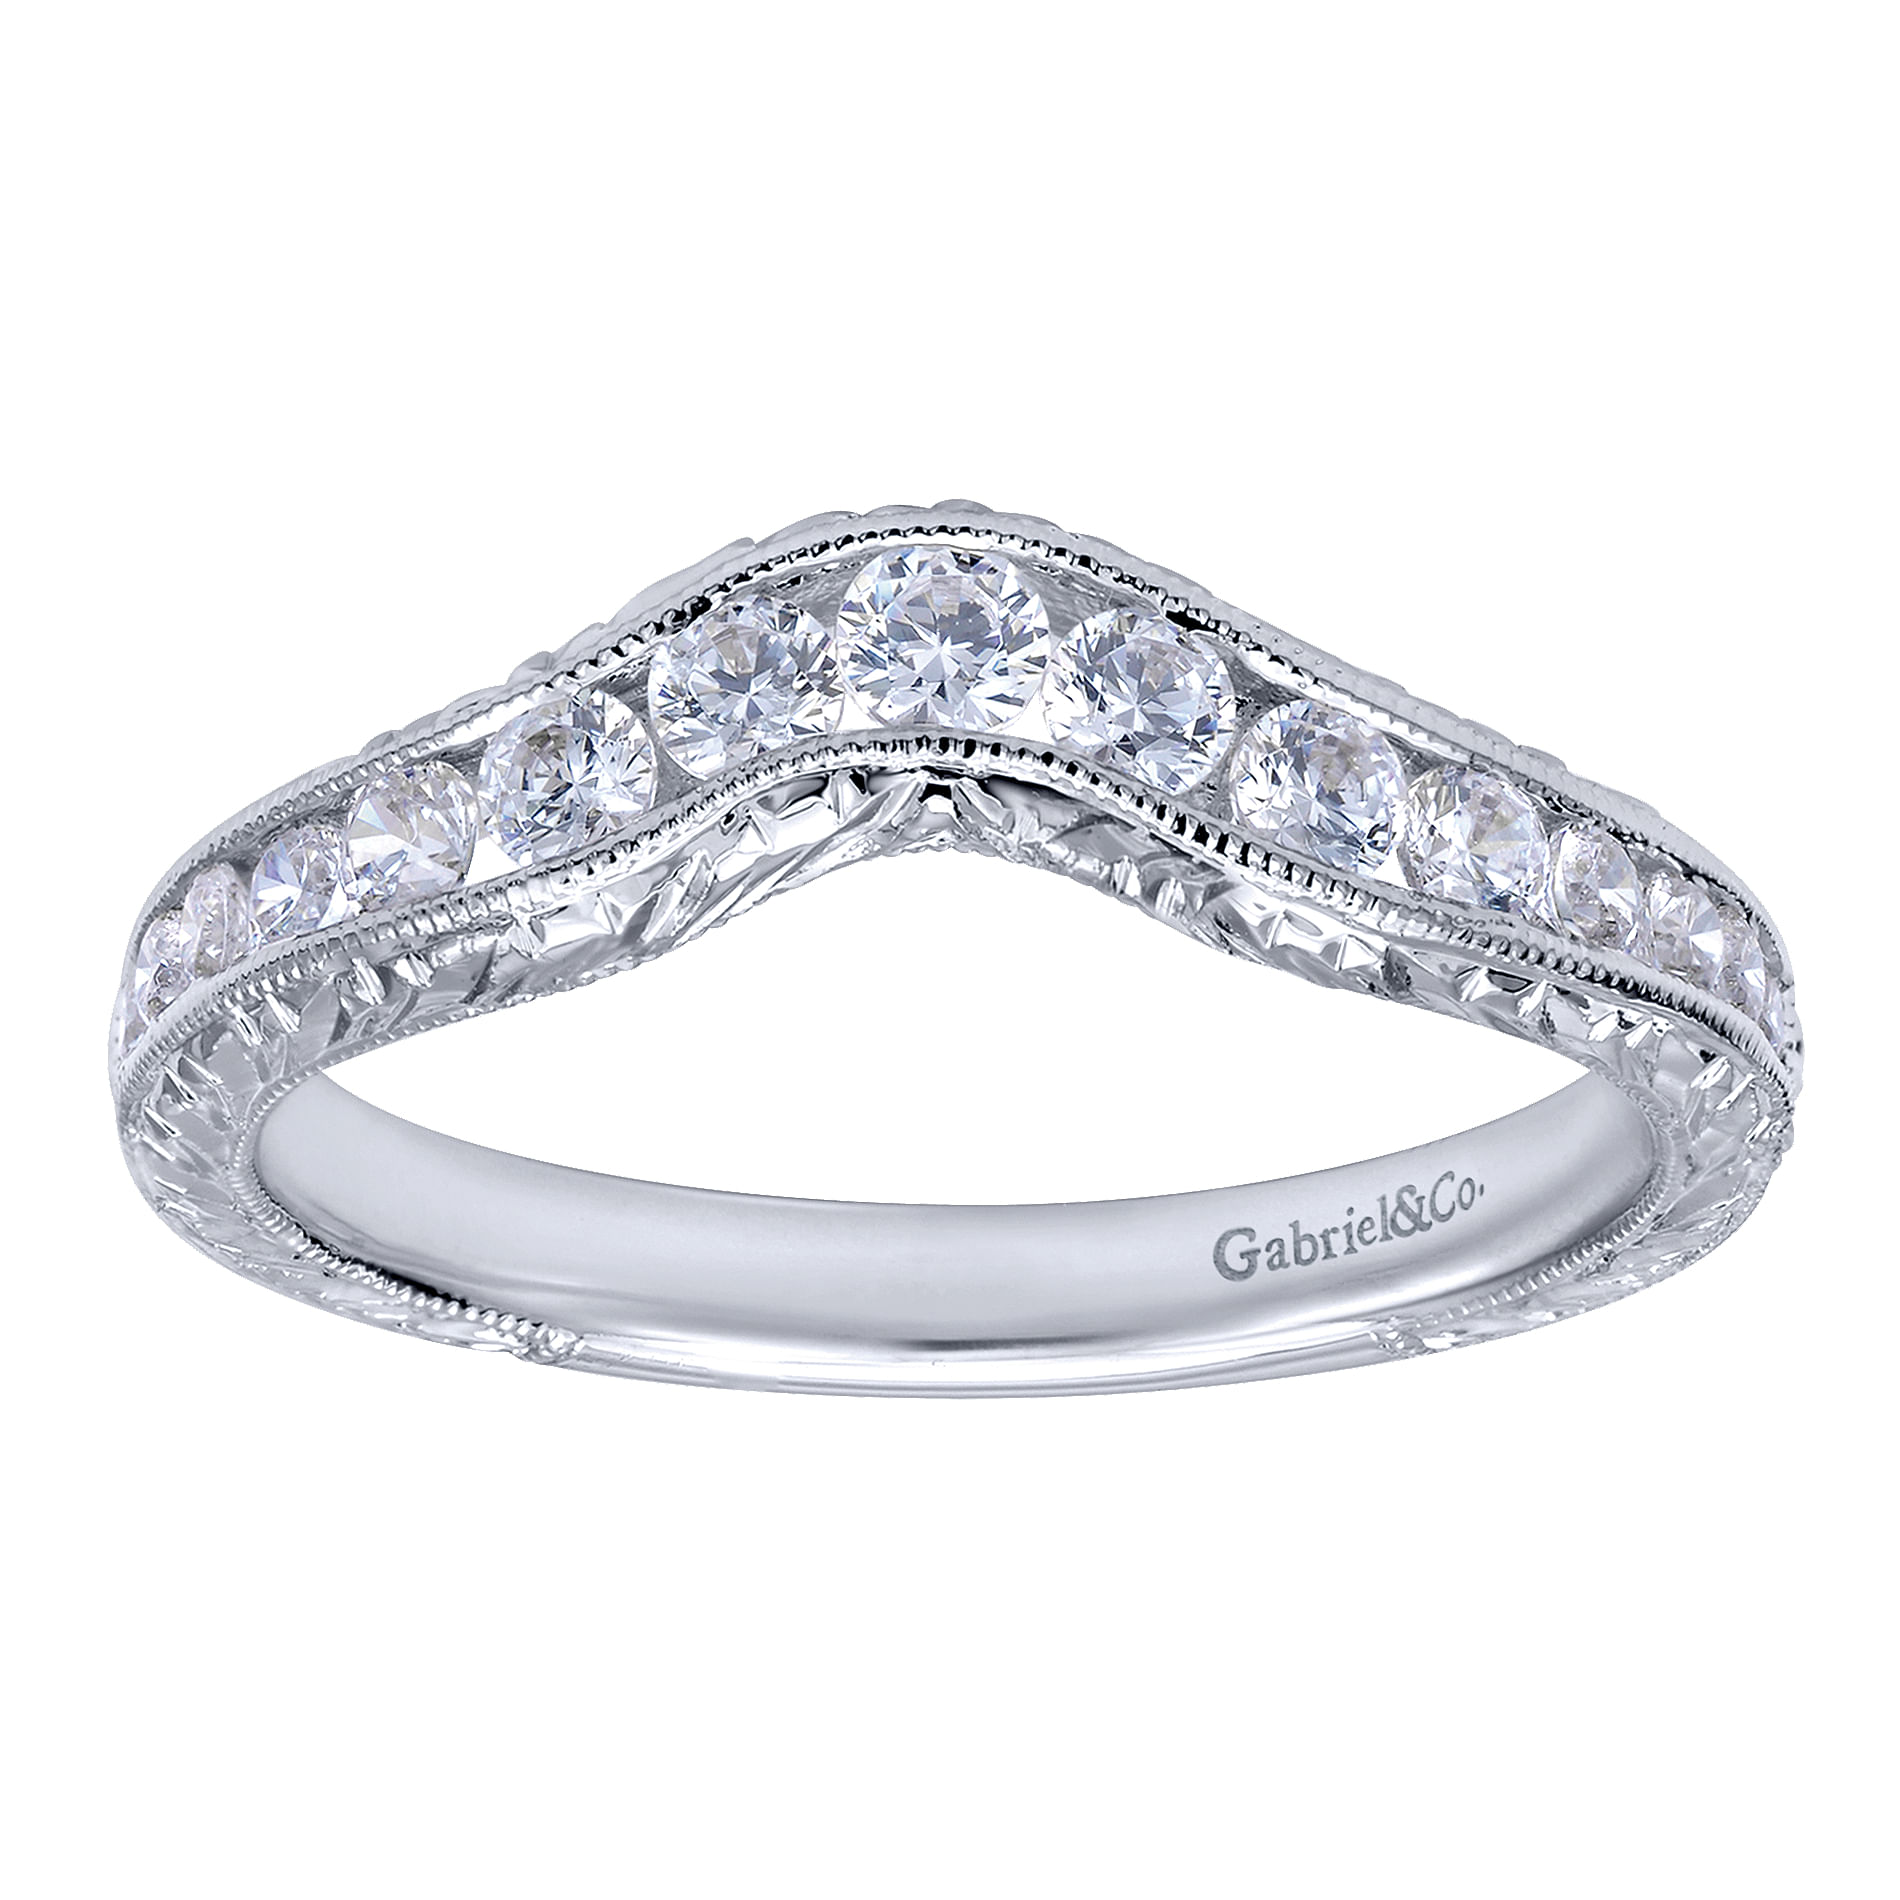 Vintage Inspired 14K White Gold Curved Channel Set Diamond Wedding Band with Engraving